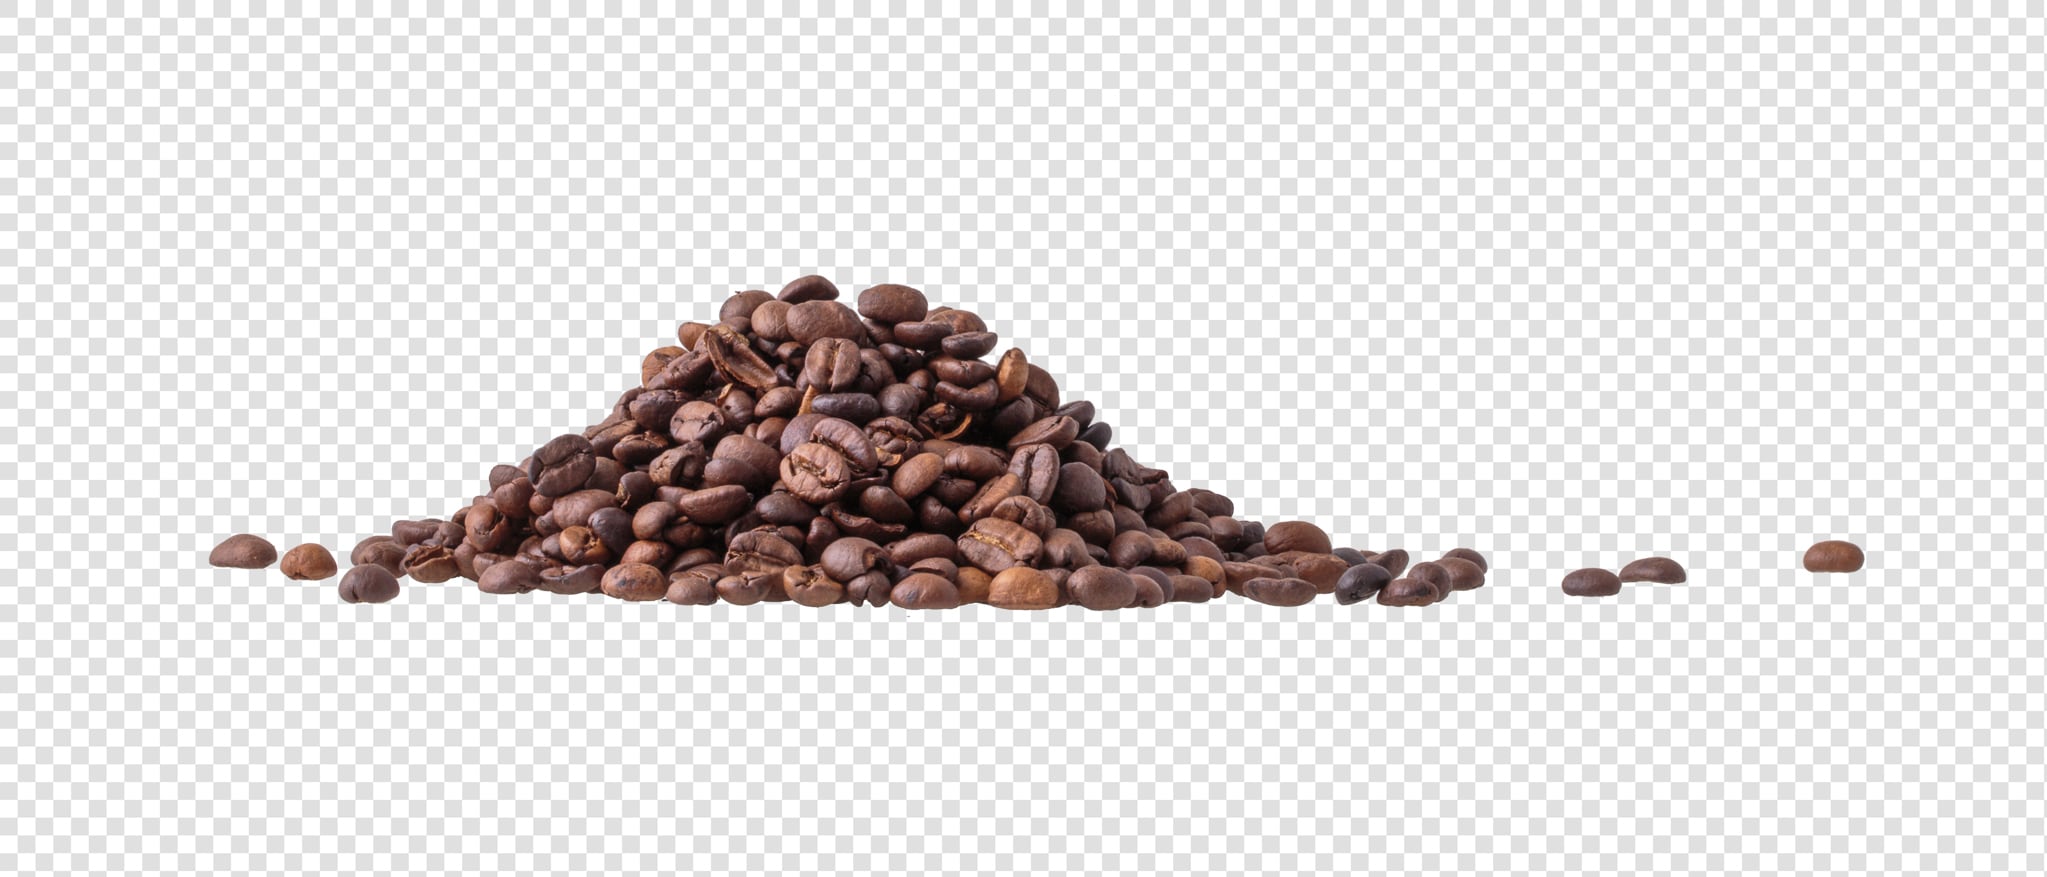 Coffee image with transparent background